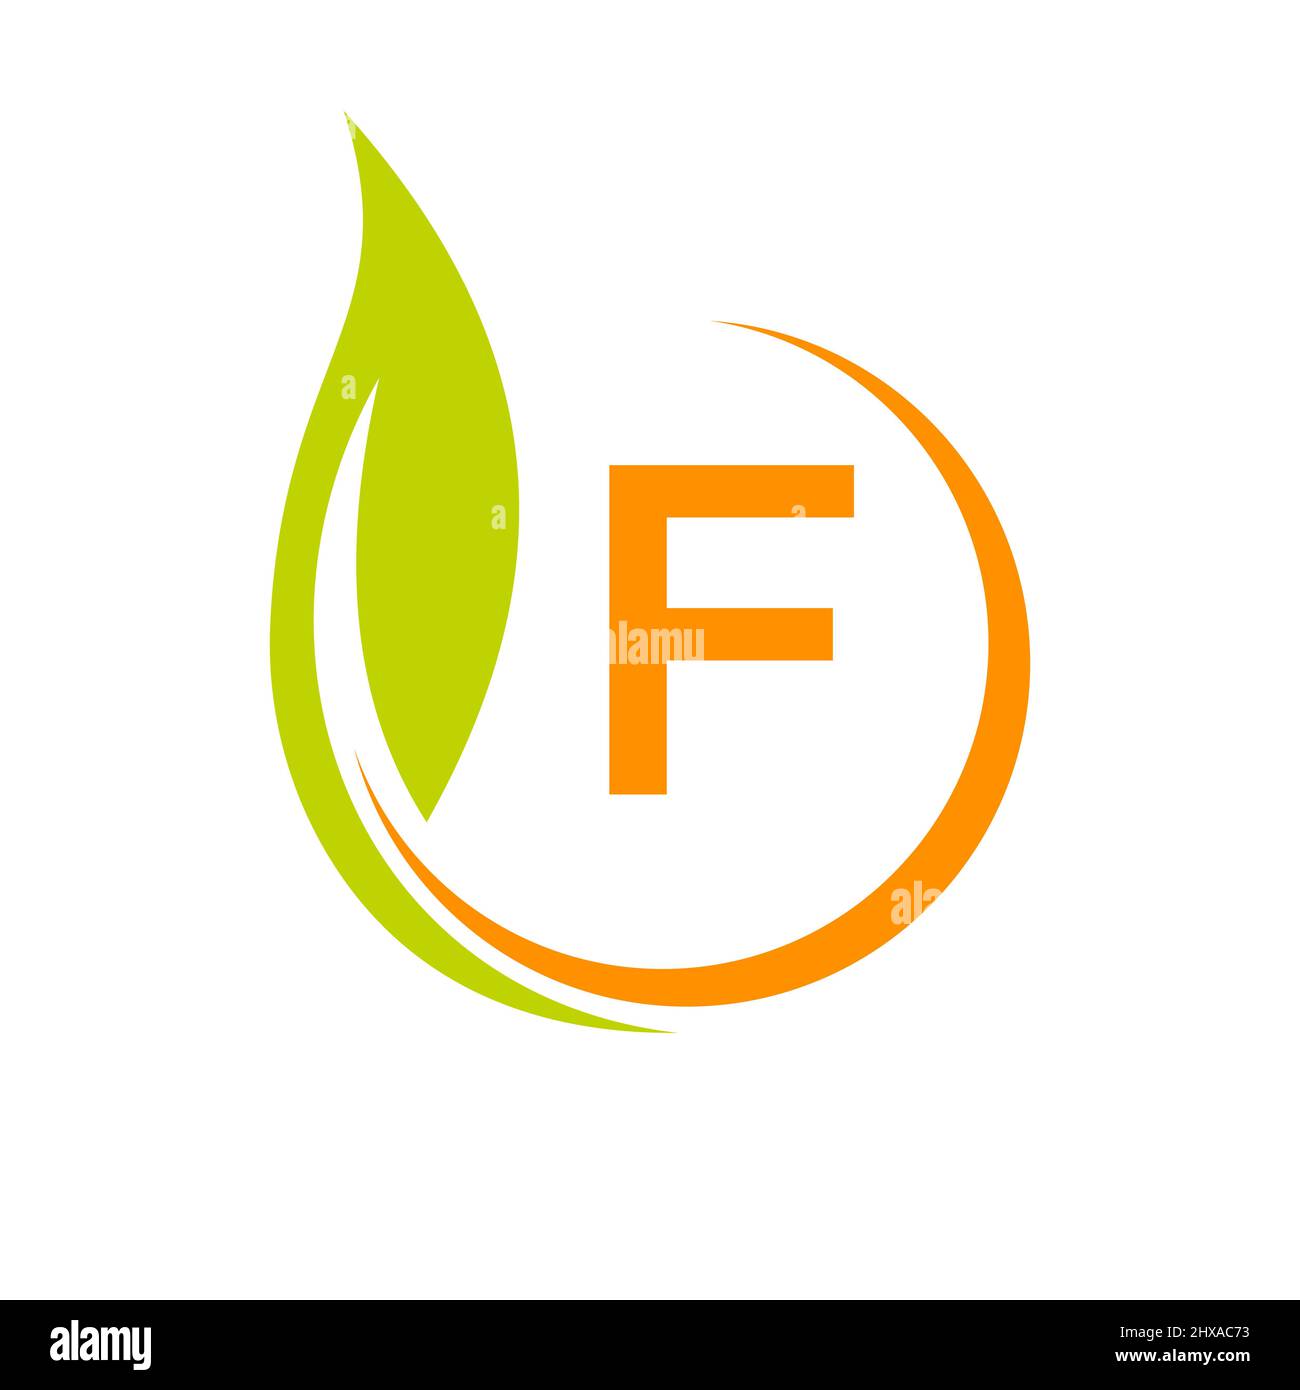 Healthy Natural Product Label Logo On Letter F Template. Letter F Eco Friendly, Green Tree Leaf Ecology Vector Concept Stock Vector